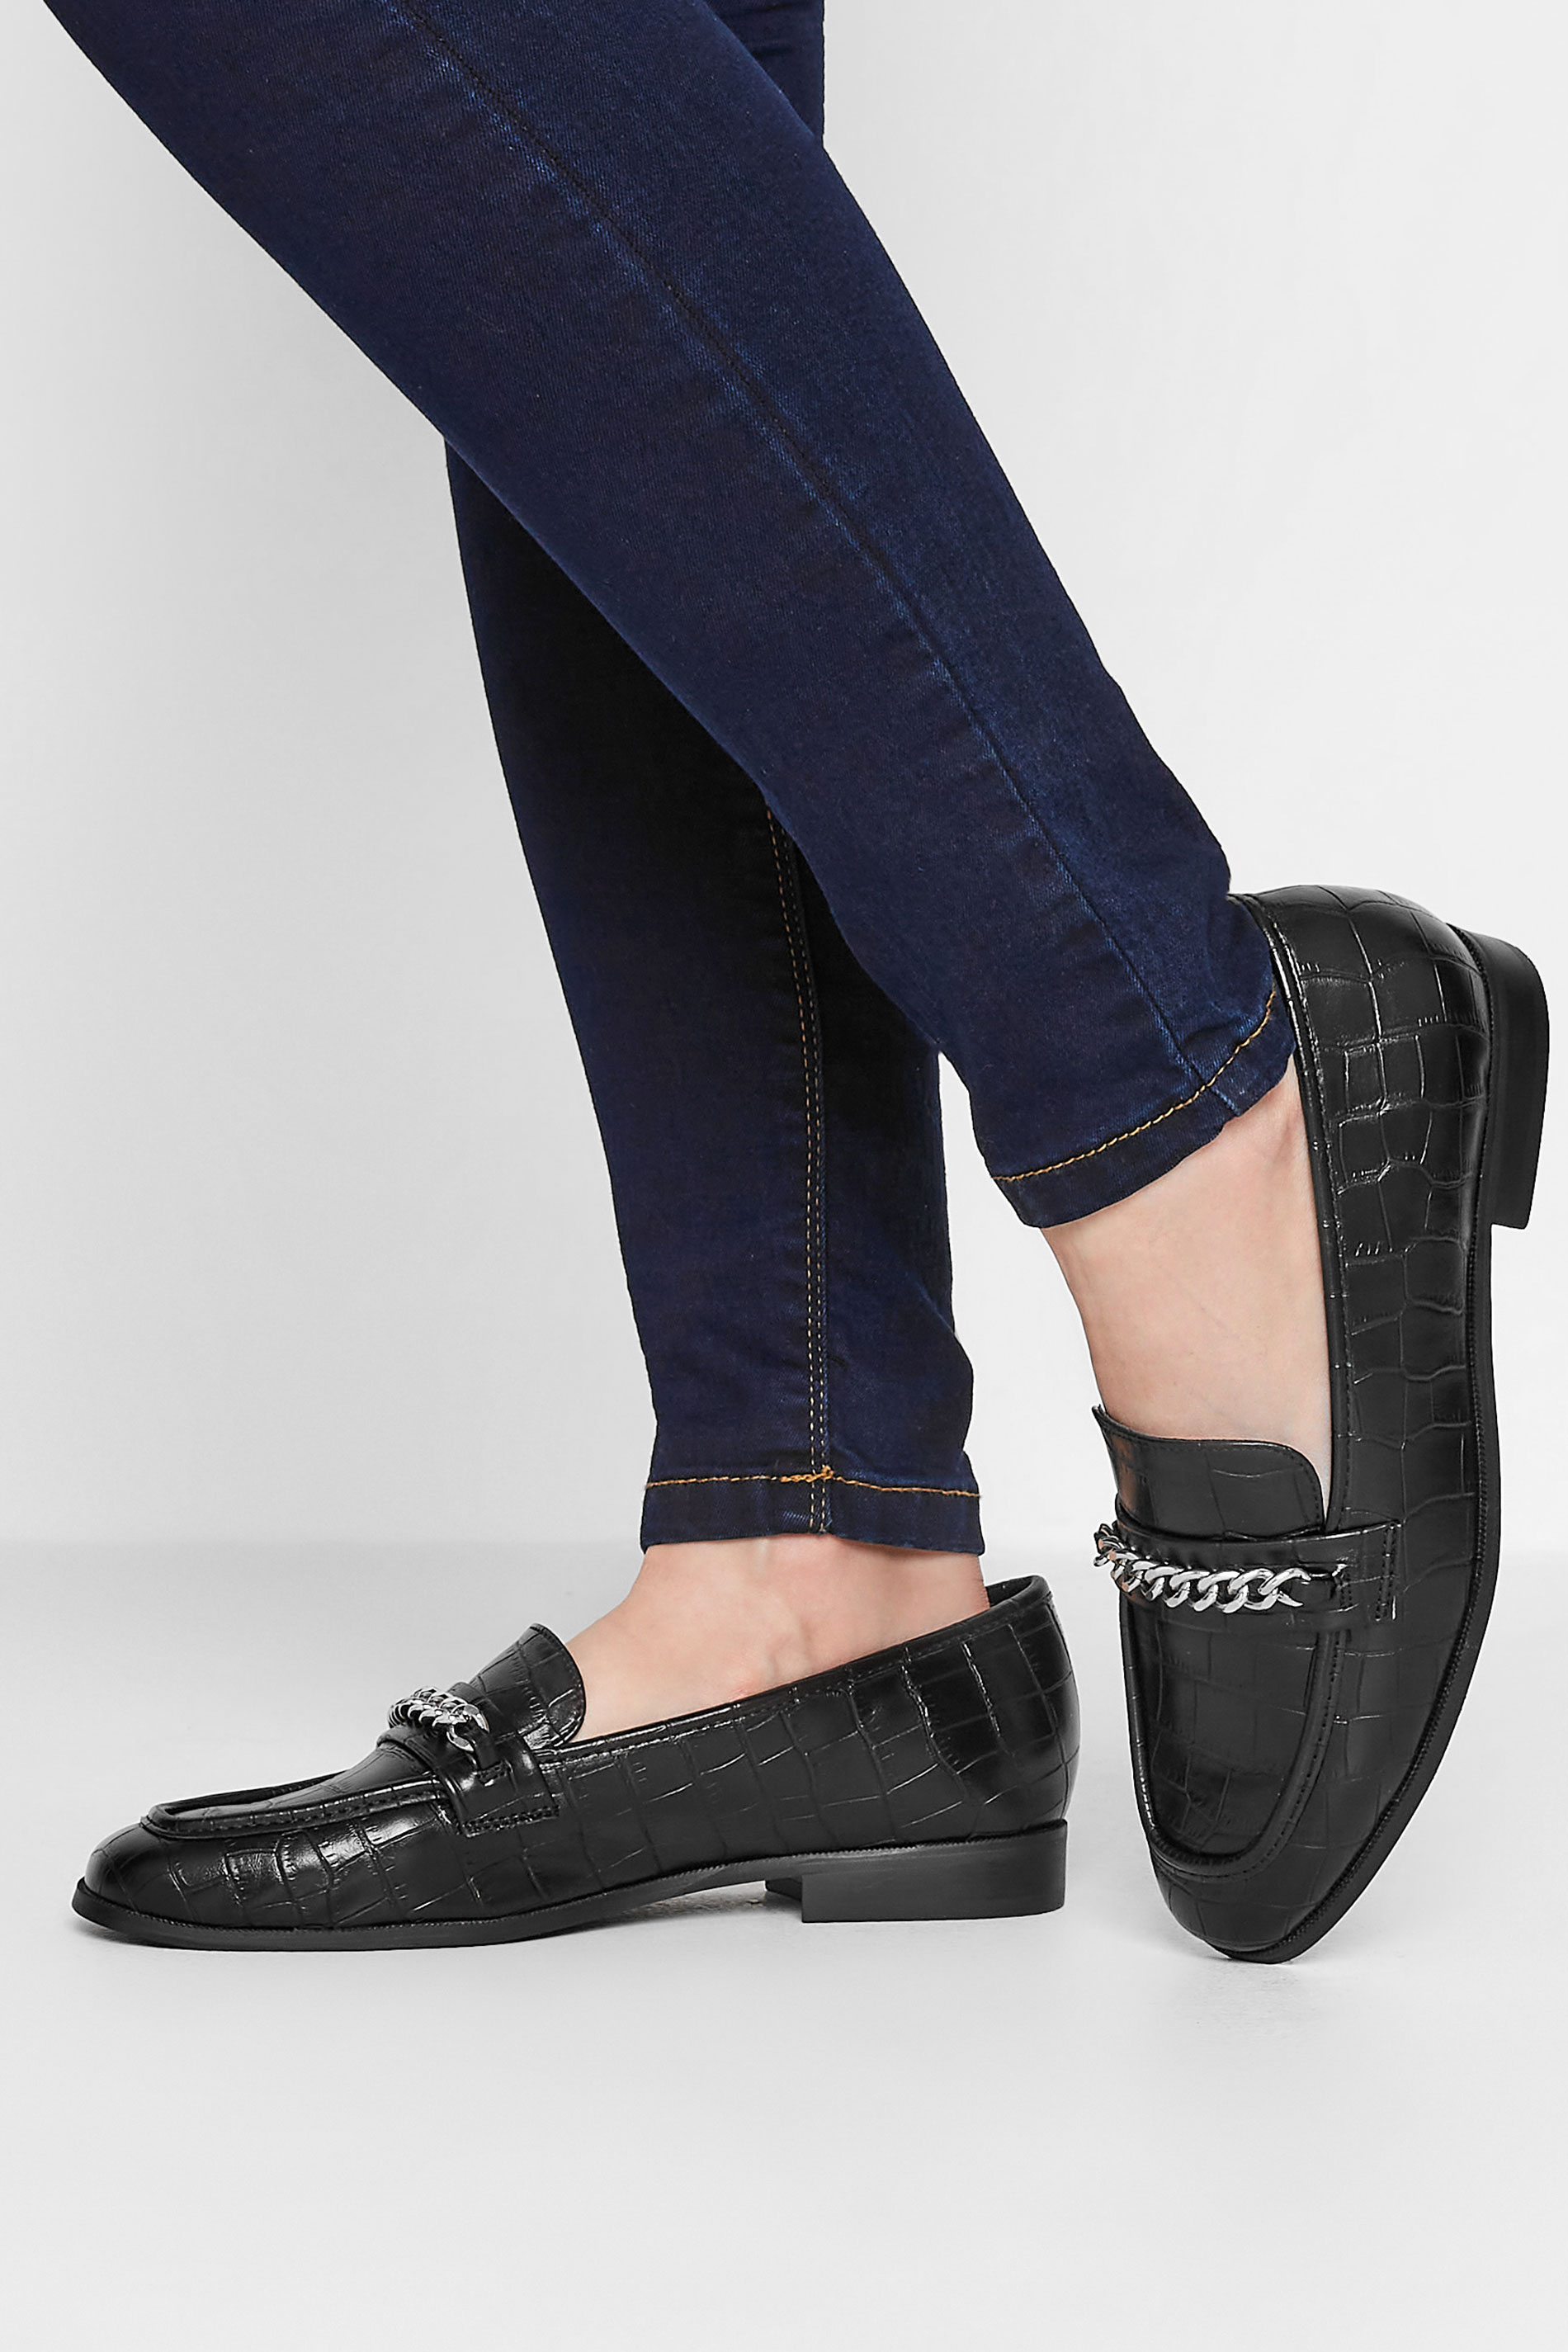 LTS Black Croc Chain Detail Loafers In Standard D Fit 1